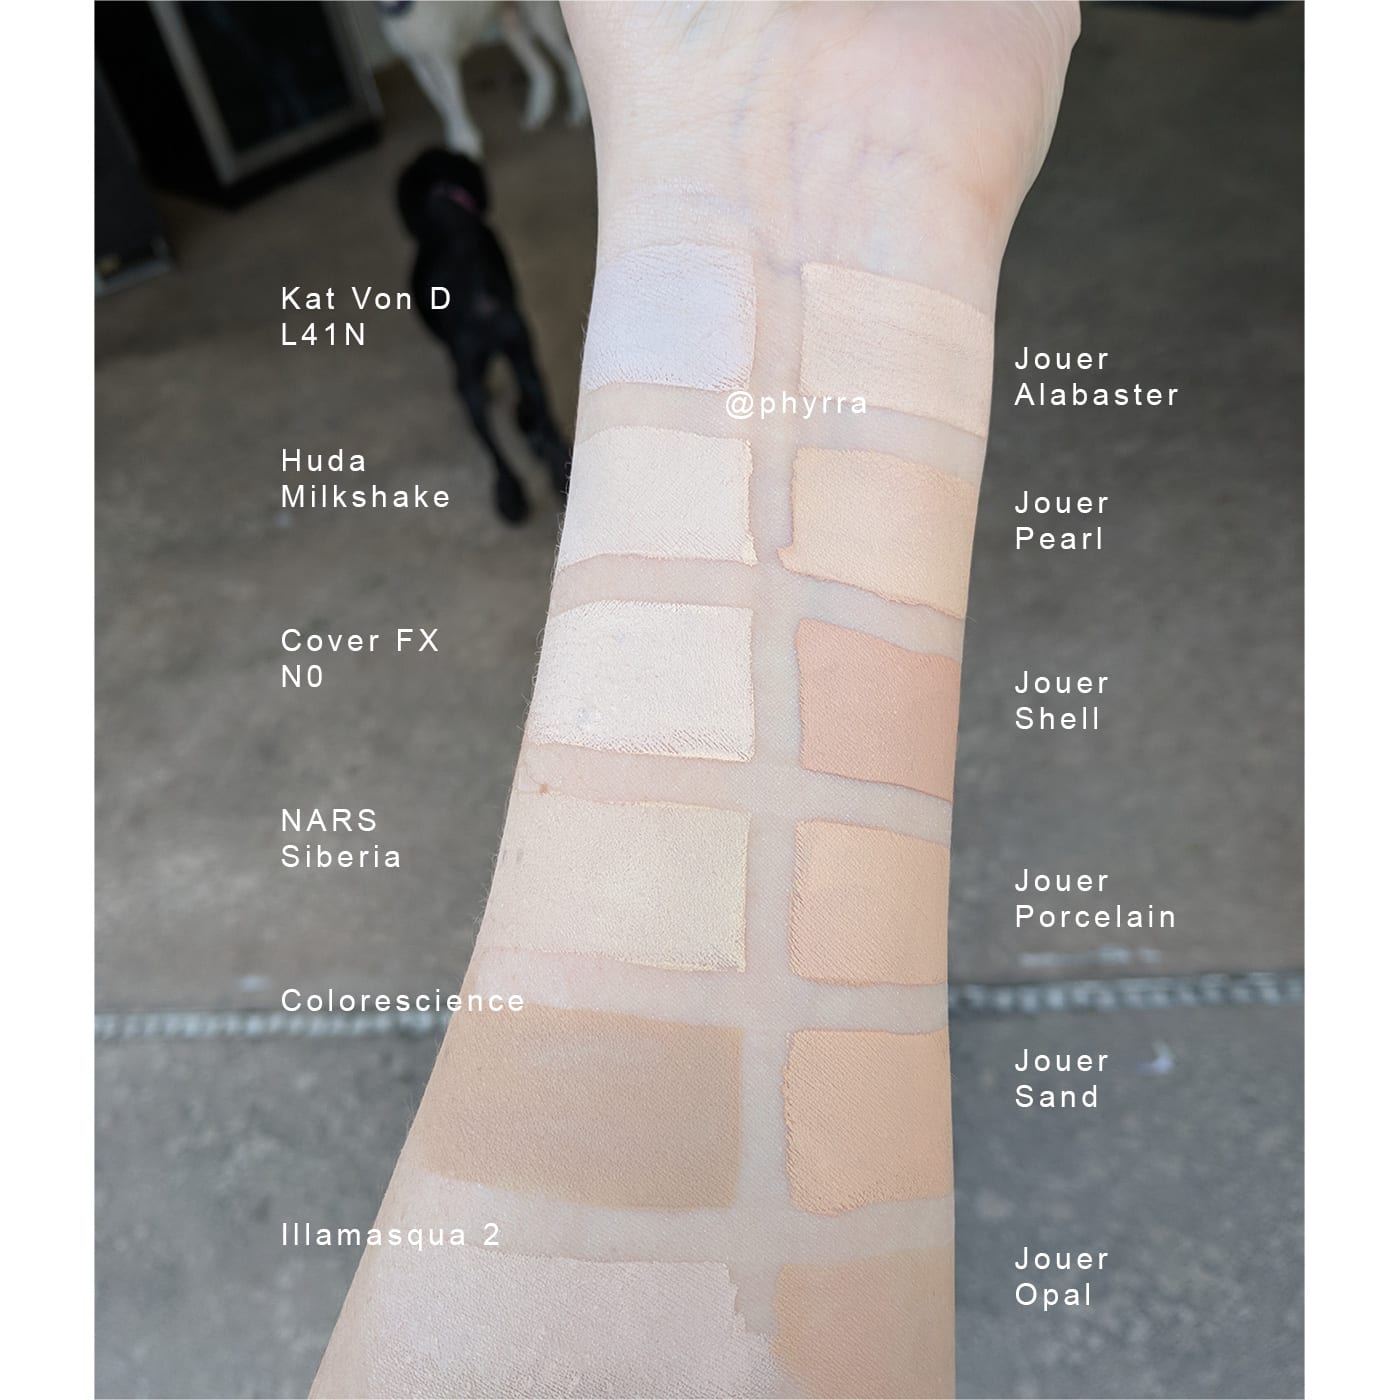 Jouer Essential High Coverage Creme Foundation